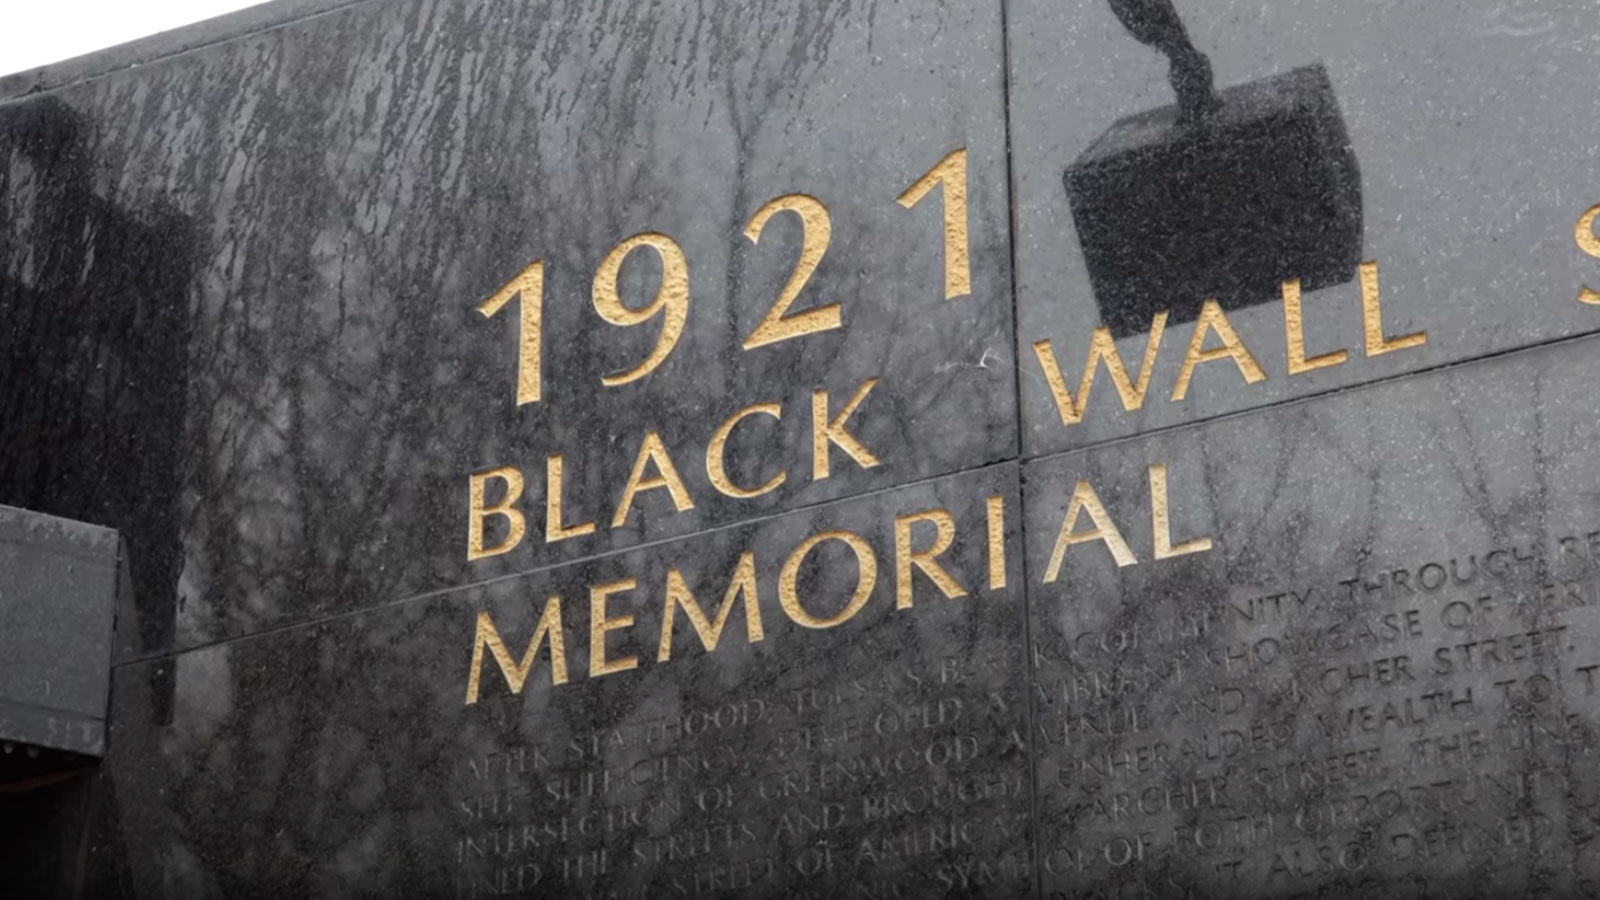 Video: Why the Tulsa Race Massacre Is So Important to the Reparations Debate